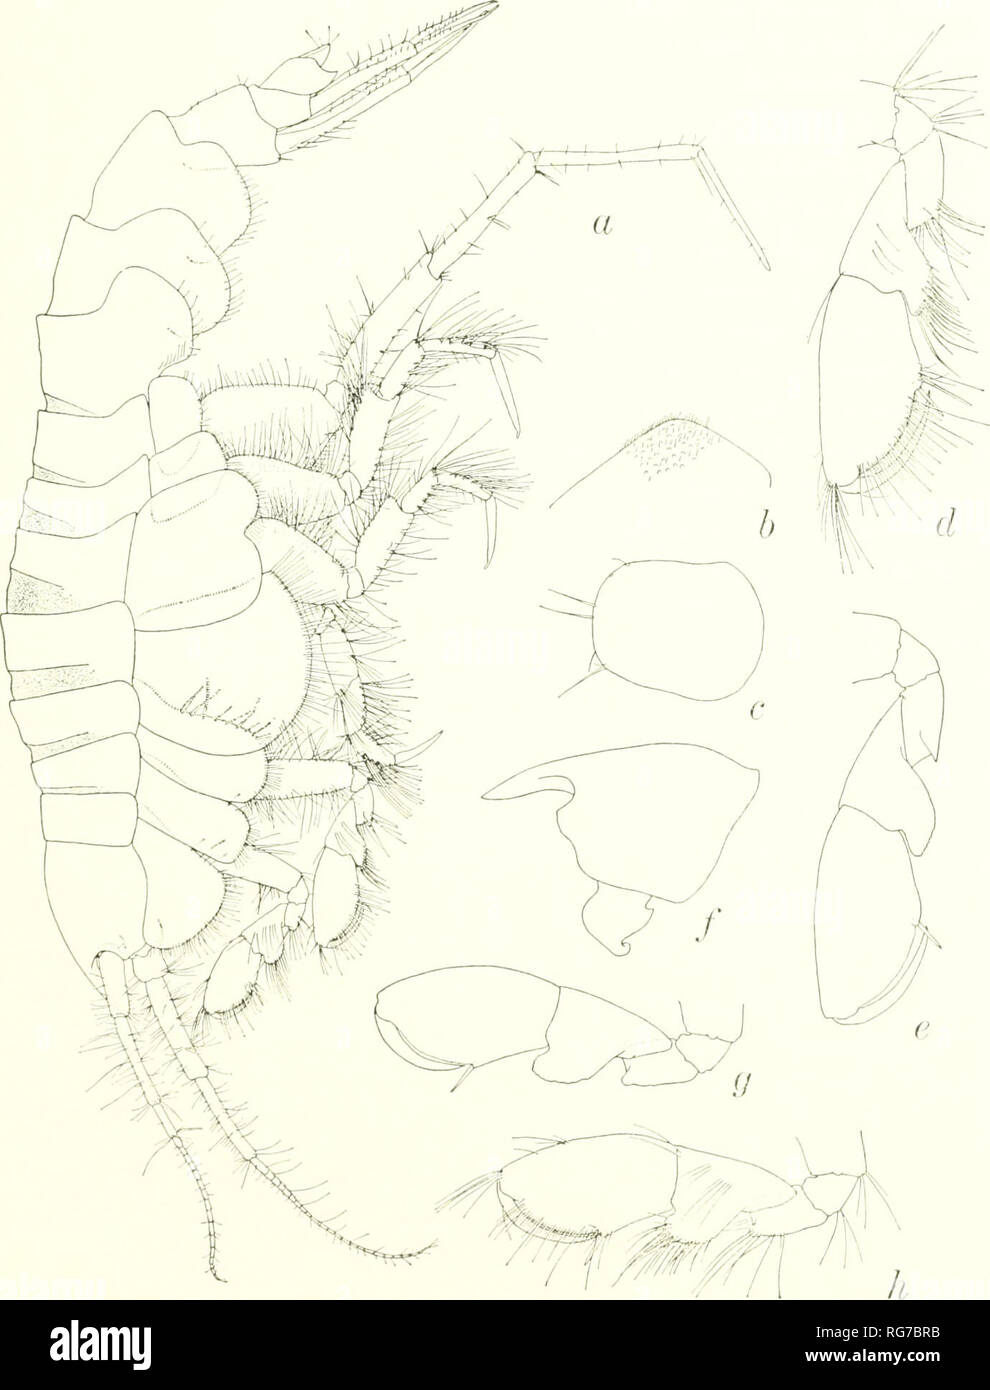 . Bulletin - United States National Museum. Science. GAMMARIDEAN AMPHIPODA 119 jecting from tangent of article 3; posteroventral corners of pleonal epimera rounded; dorsum of pleon very minutely tuberculate and cov- ered with down; telson romided apically. Uropod 3 missing. HoLOTYPE.—xHF No. 6118, female, 11.0 mm. Unique.. Figure 56.—Monoculodes (?) sudor, new species, holotype, female, 11.0 mm, 7234: a, lateral aspect; b, dorsal enlargement of pleonite 3 to show &quot;down&quot; and tuberculations; c, telson; d,e, gnathopod 2; f, head; g,h, gnathopod 1.. Please note that these images are ext Stock Photo